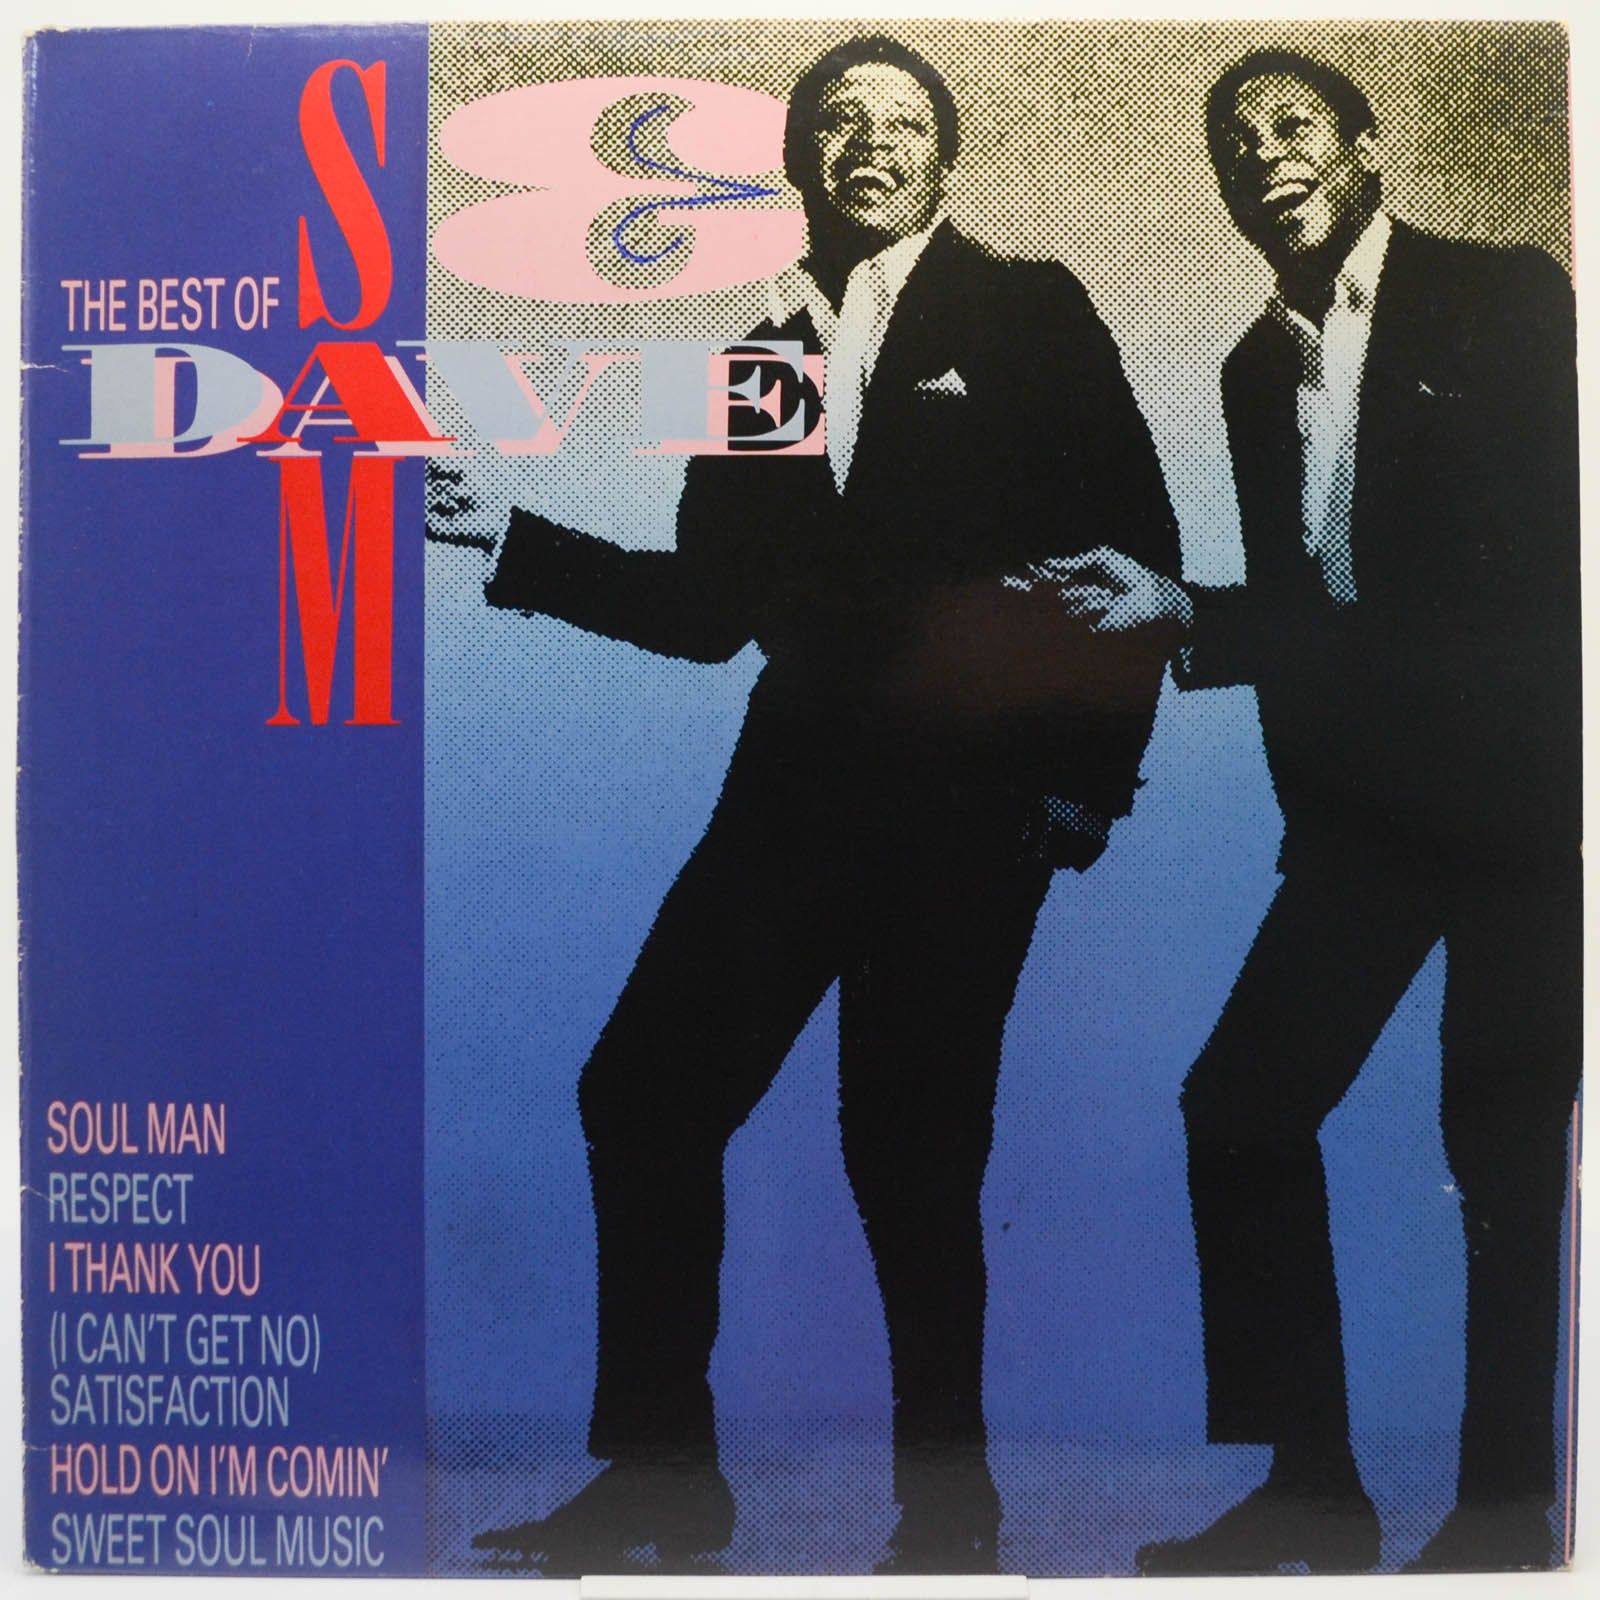 Sam & Dave — The Best Of, 1985